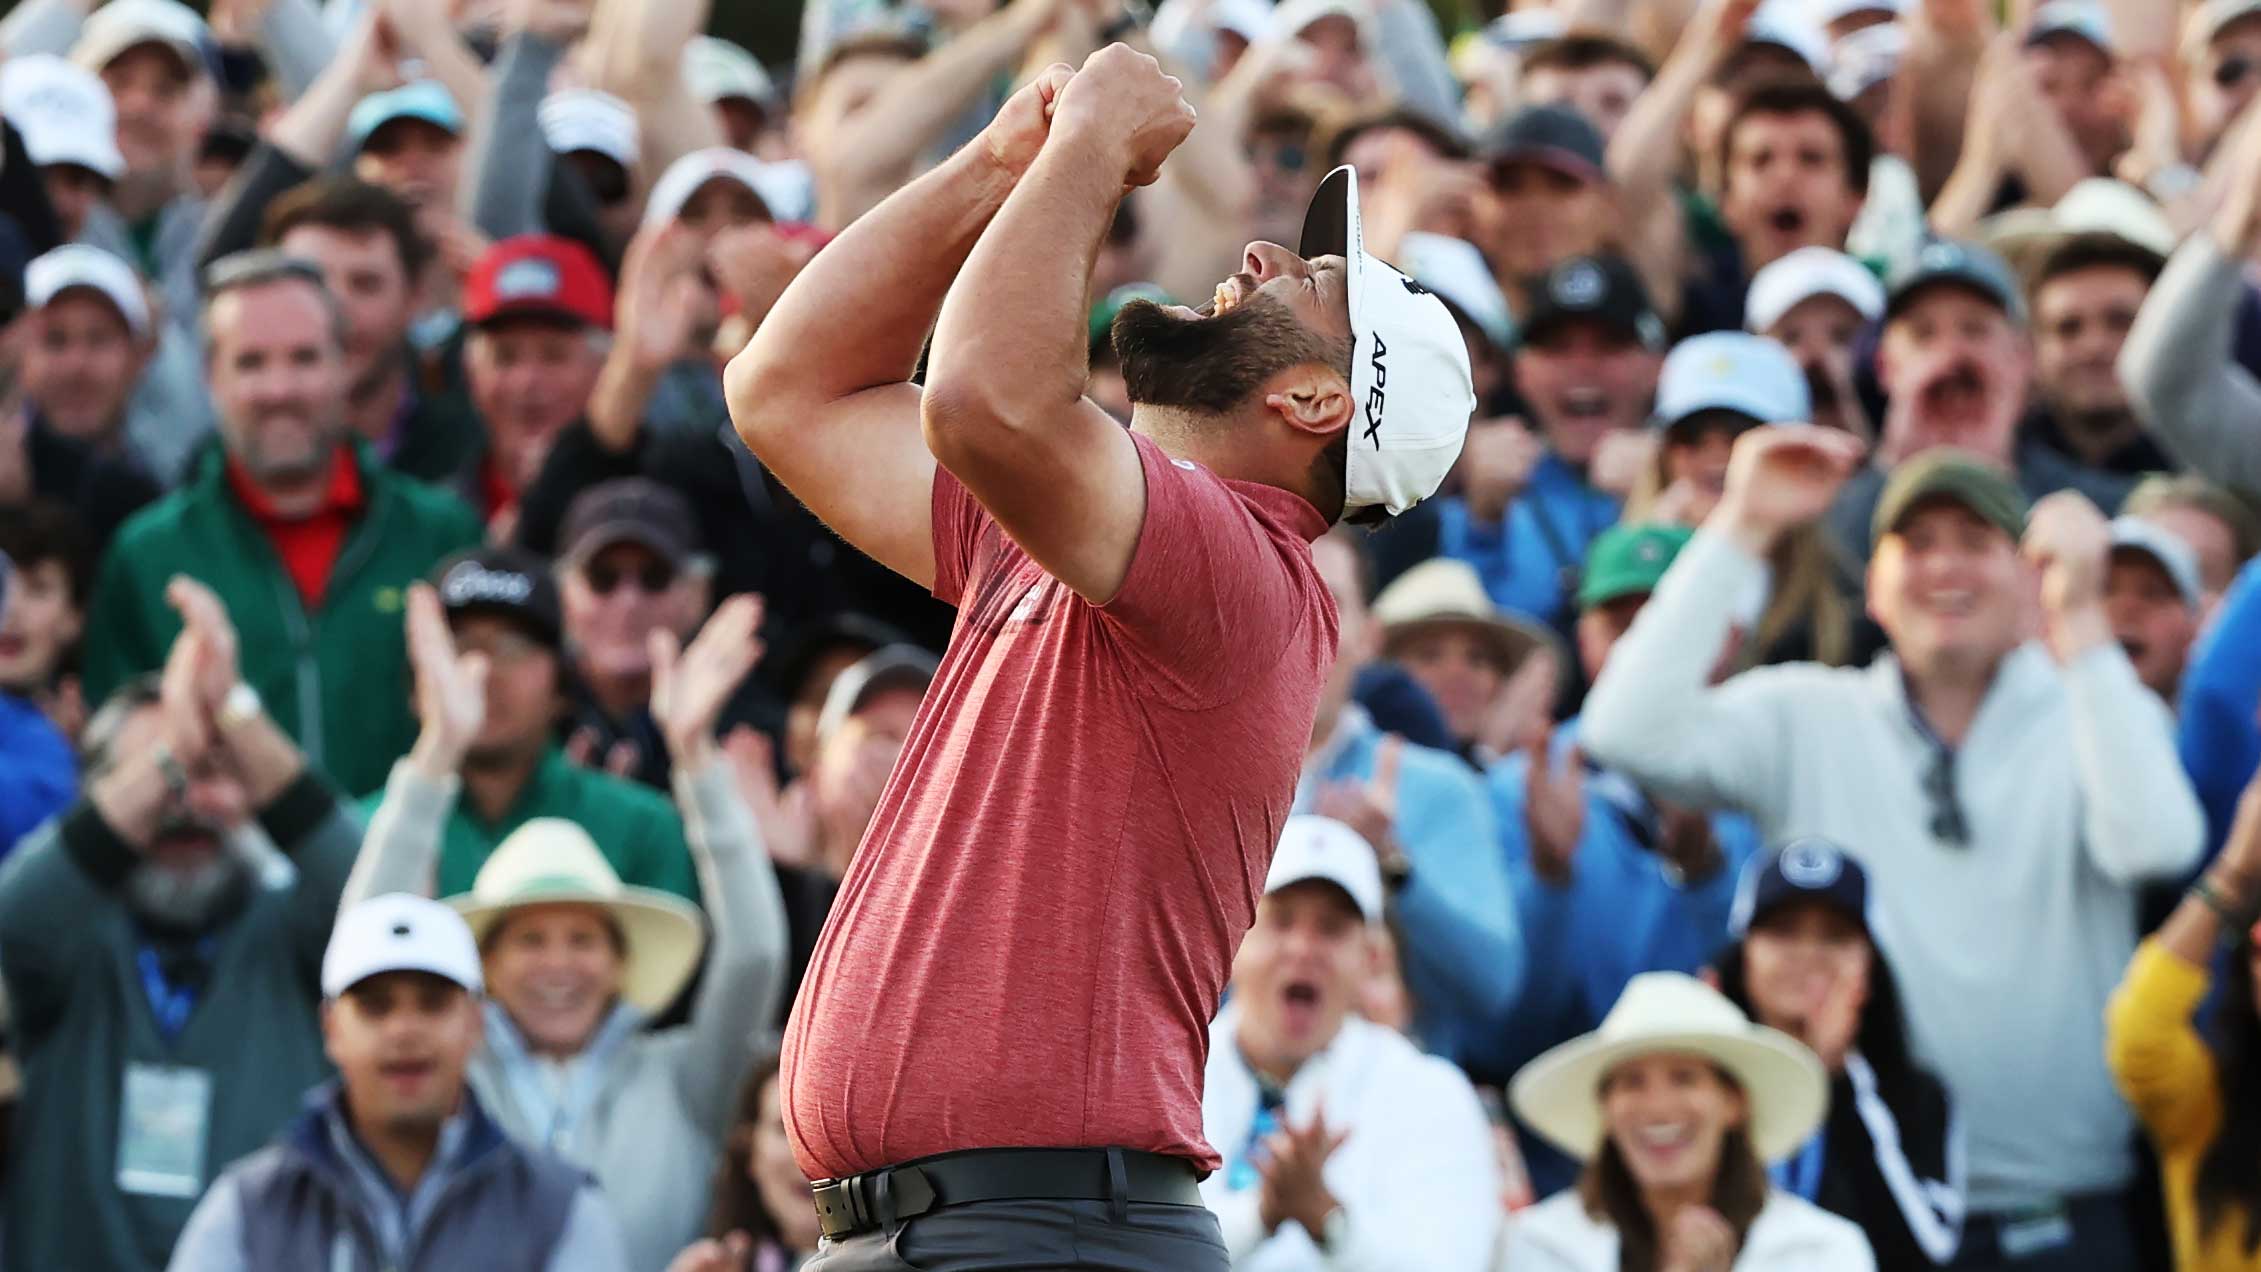 Vamos! Jon Rahm storms back to win the Masters and claim second major